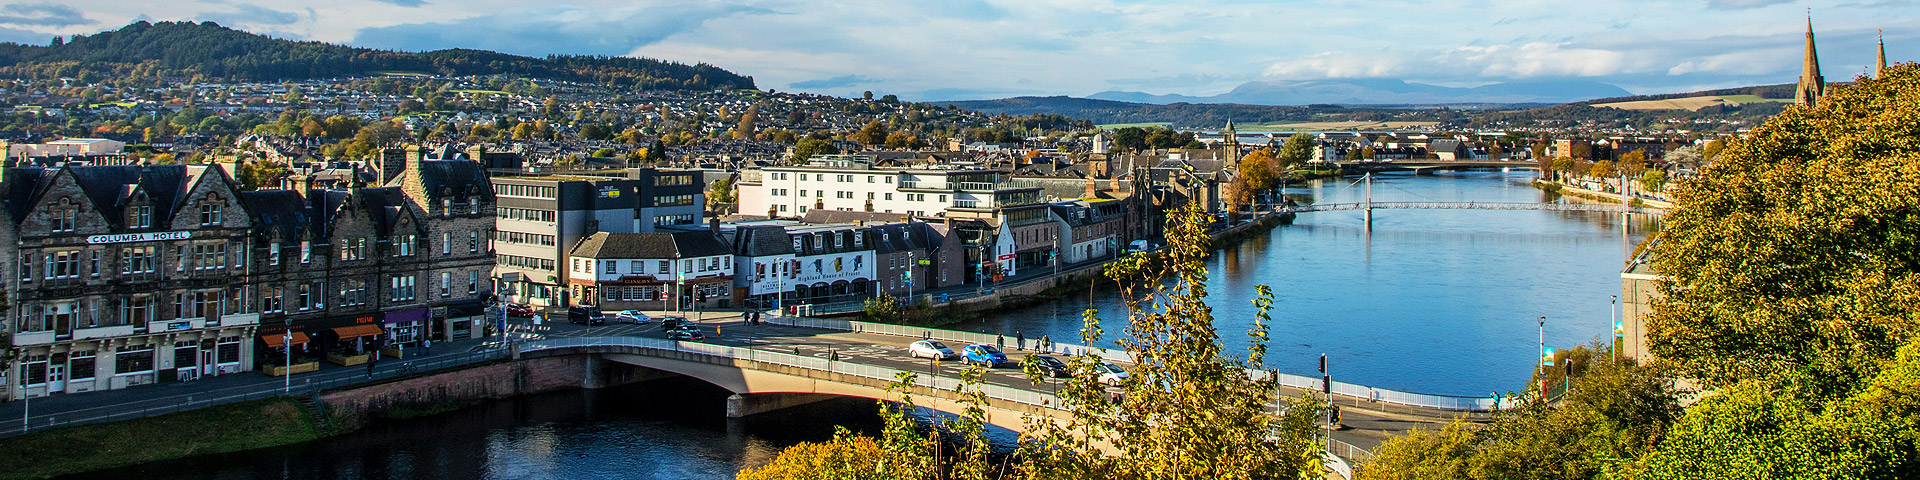 City and River Ness, Inverness